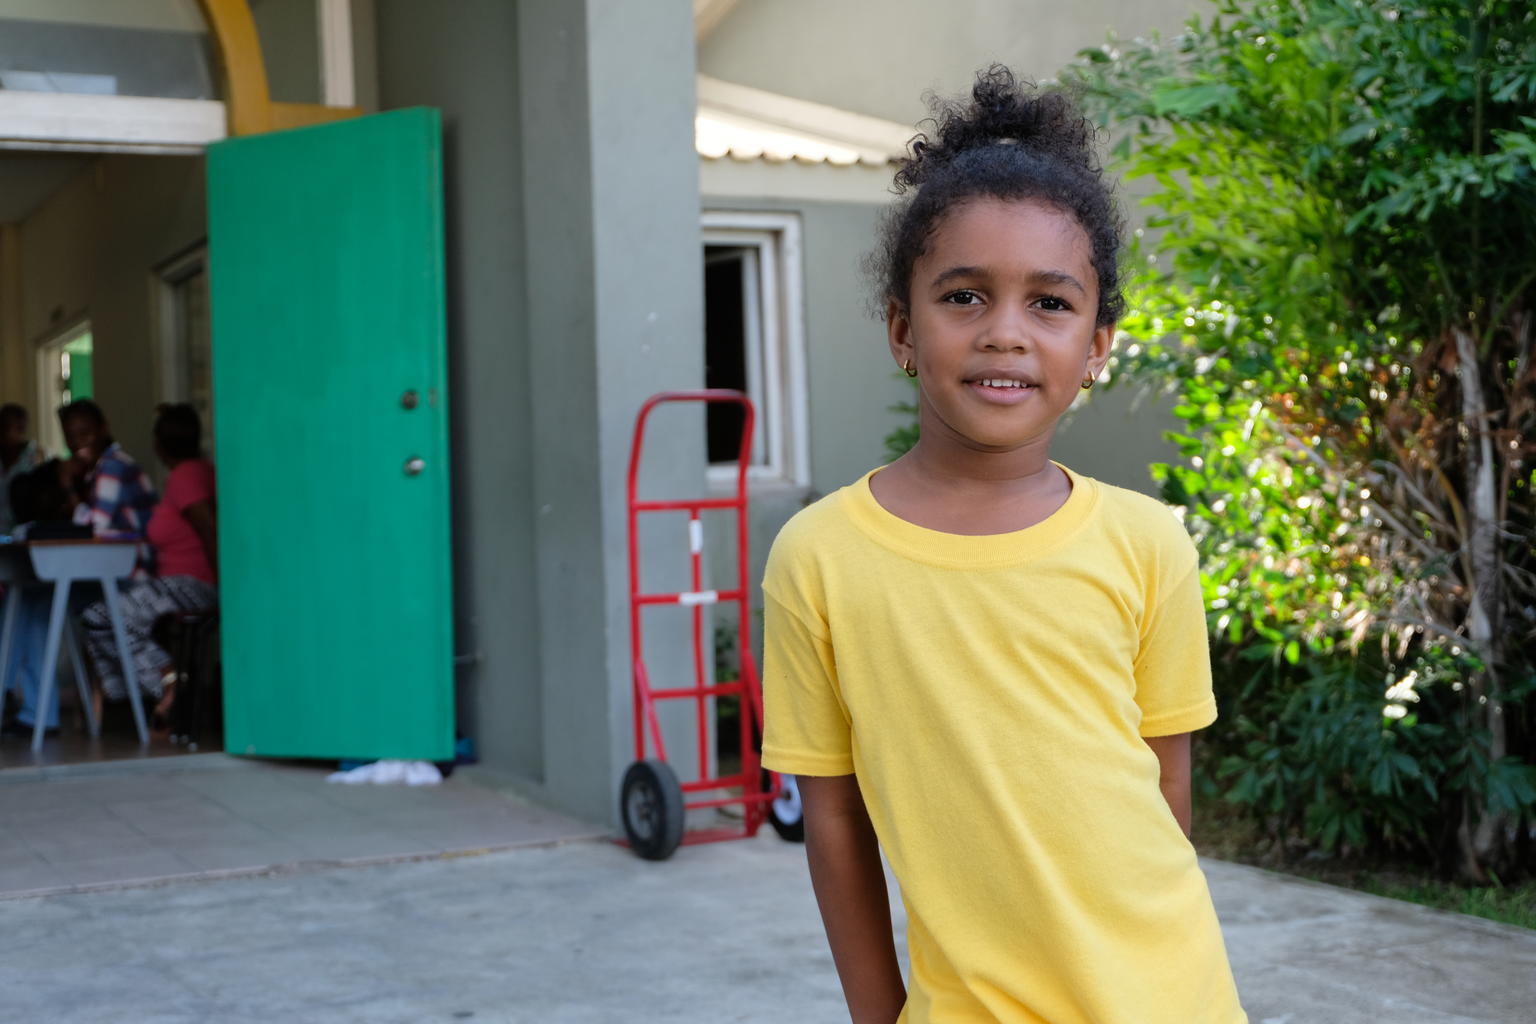 On 10 September, 6-year-old Bella Rian Jackson smiles outside the National Technical Training Centre in St. John's, capital of the island of Antigua. The education facility currently shelters displaced families from Barbuda whose homes were destroyed by Hurricane Irma. Bella, from Antigua, volunteers at the shelter with her grandparents, sorting and folding donated clothes, cleaning and tidying up the communal areas, and helping to distribute food and supplies. “I wanted to volunteer with my grandma,” Bella says. “If the children can’t come here, they’d [sic] have nowhere to go, and another storm could come,” she adds. More than 130 people, including scores of children, sheltered at the centre when the facility was at its busiest. On 6 September 2017, Hurricane Irma, the strongest hurricane ever recorded in the Atlantic, pummelled islands in the Eastern Caribbean. The category 5 storm left a path of destruction – especially on Anguilla, the British Virgin Islands, Barbuda and Turks and Caicos Islands. Some 73,000 people in this area, including 20,000 children, are affected, and at least 132 schools have been damaged. Irma disrupted communication networks in many areas and damaged or destroyed infrastructure, including roads, idges, hospitals and schools. The island of Barbuda suffered extensive damage during the disaster. Over 90 per cent of its buildings were destroyed, with homes, schools, the island’s only hospital, and other infrastructure destroyed or severely damaged. A 2-year-old boy was also killed during the storm, and most of Barbuda’s nearly 2,000 residents have been displaced. Officials quickly evacuated the vast majority of the population to Antigua, Barbuda’s sister island, ahead of an anticipated category four hurricane (Hurricane Jose) expected to wreak additional destruction on the already devastated island. Antiguans have rallied to support their compatriots, with church and community groups volunteering at shelters hosting